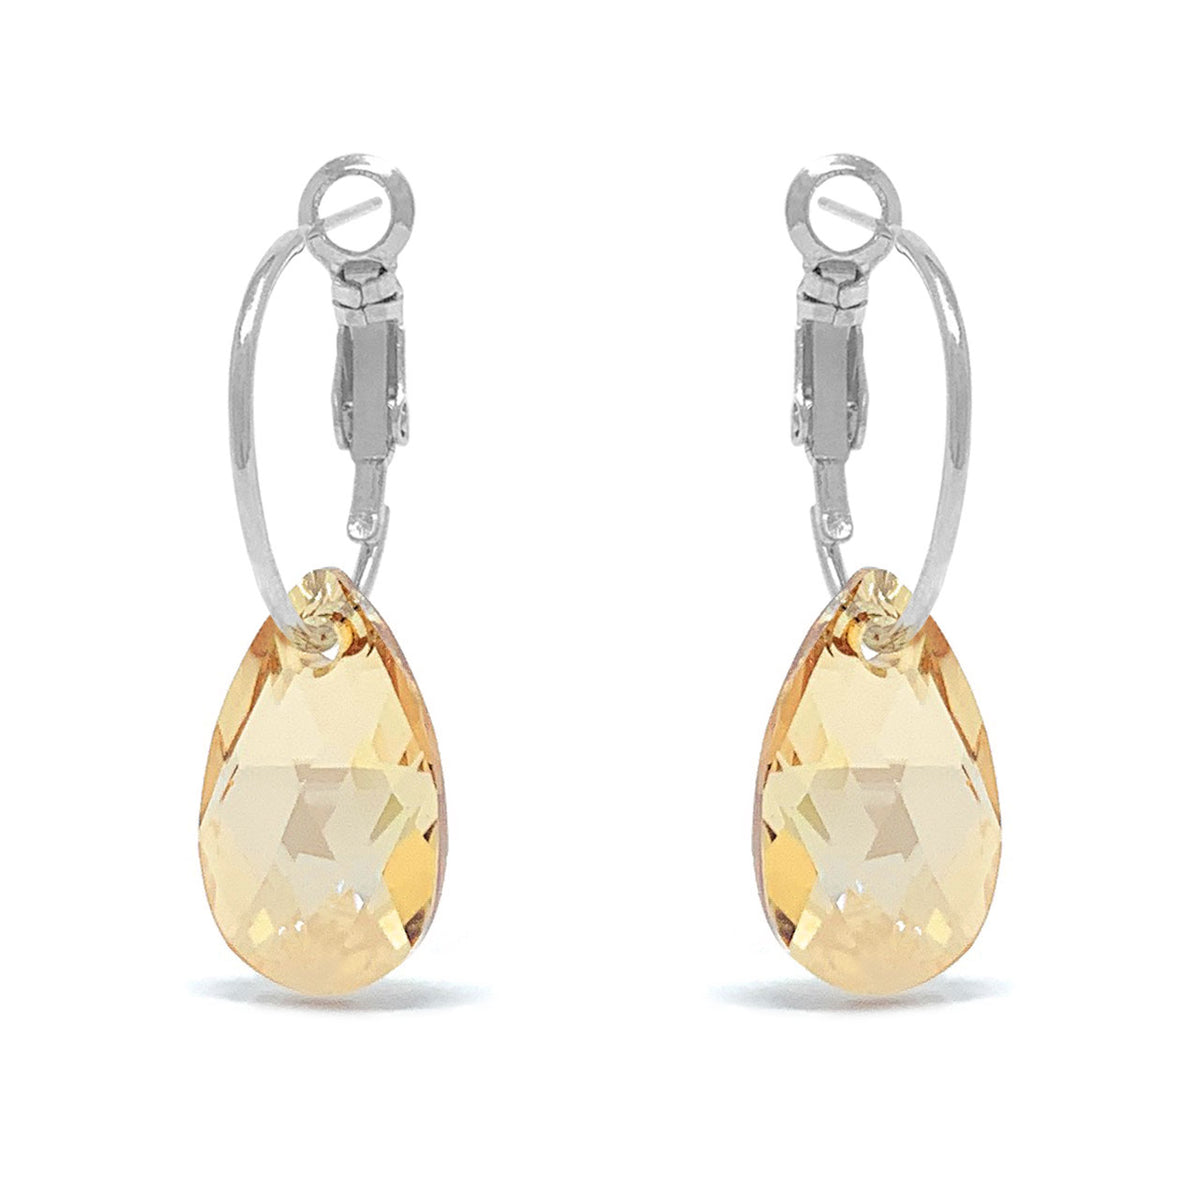 Aurora Small Drop Earrings with Yellow Beige Golden Shadow Pear Crystals from Swarovski Silver Toned Rhodium Plated - Ed Heart